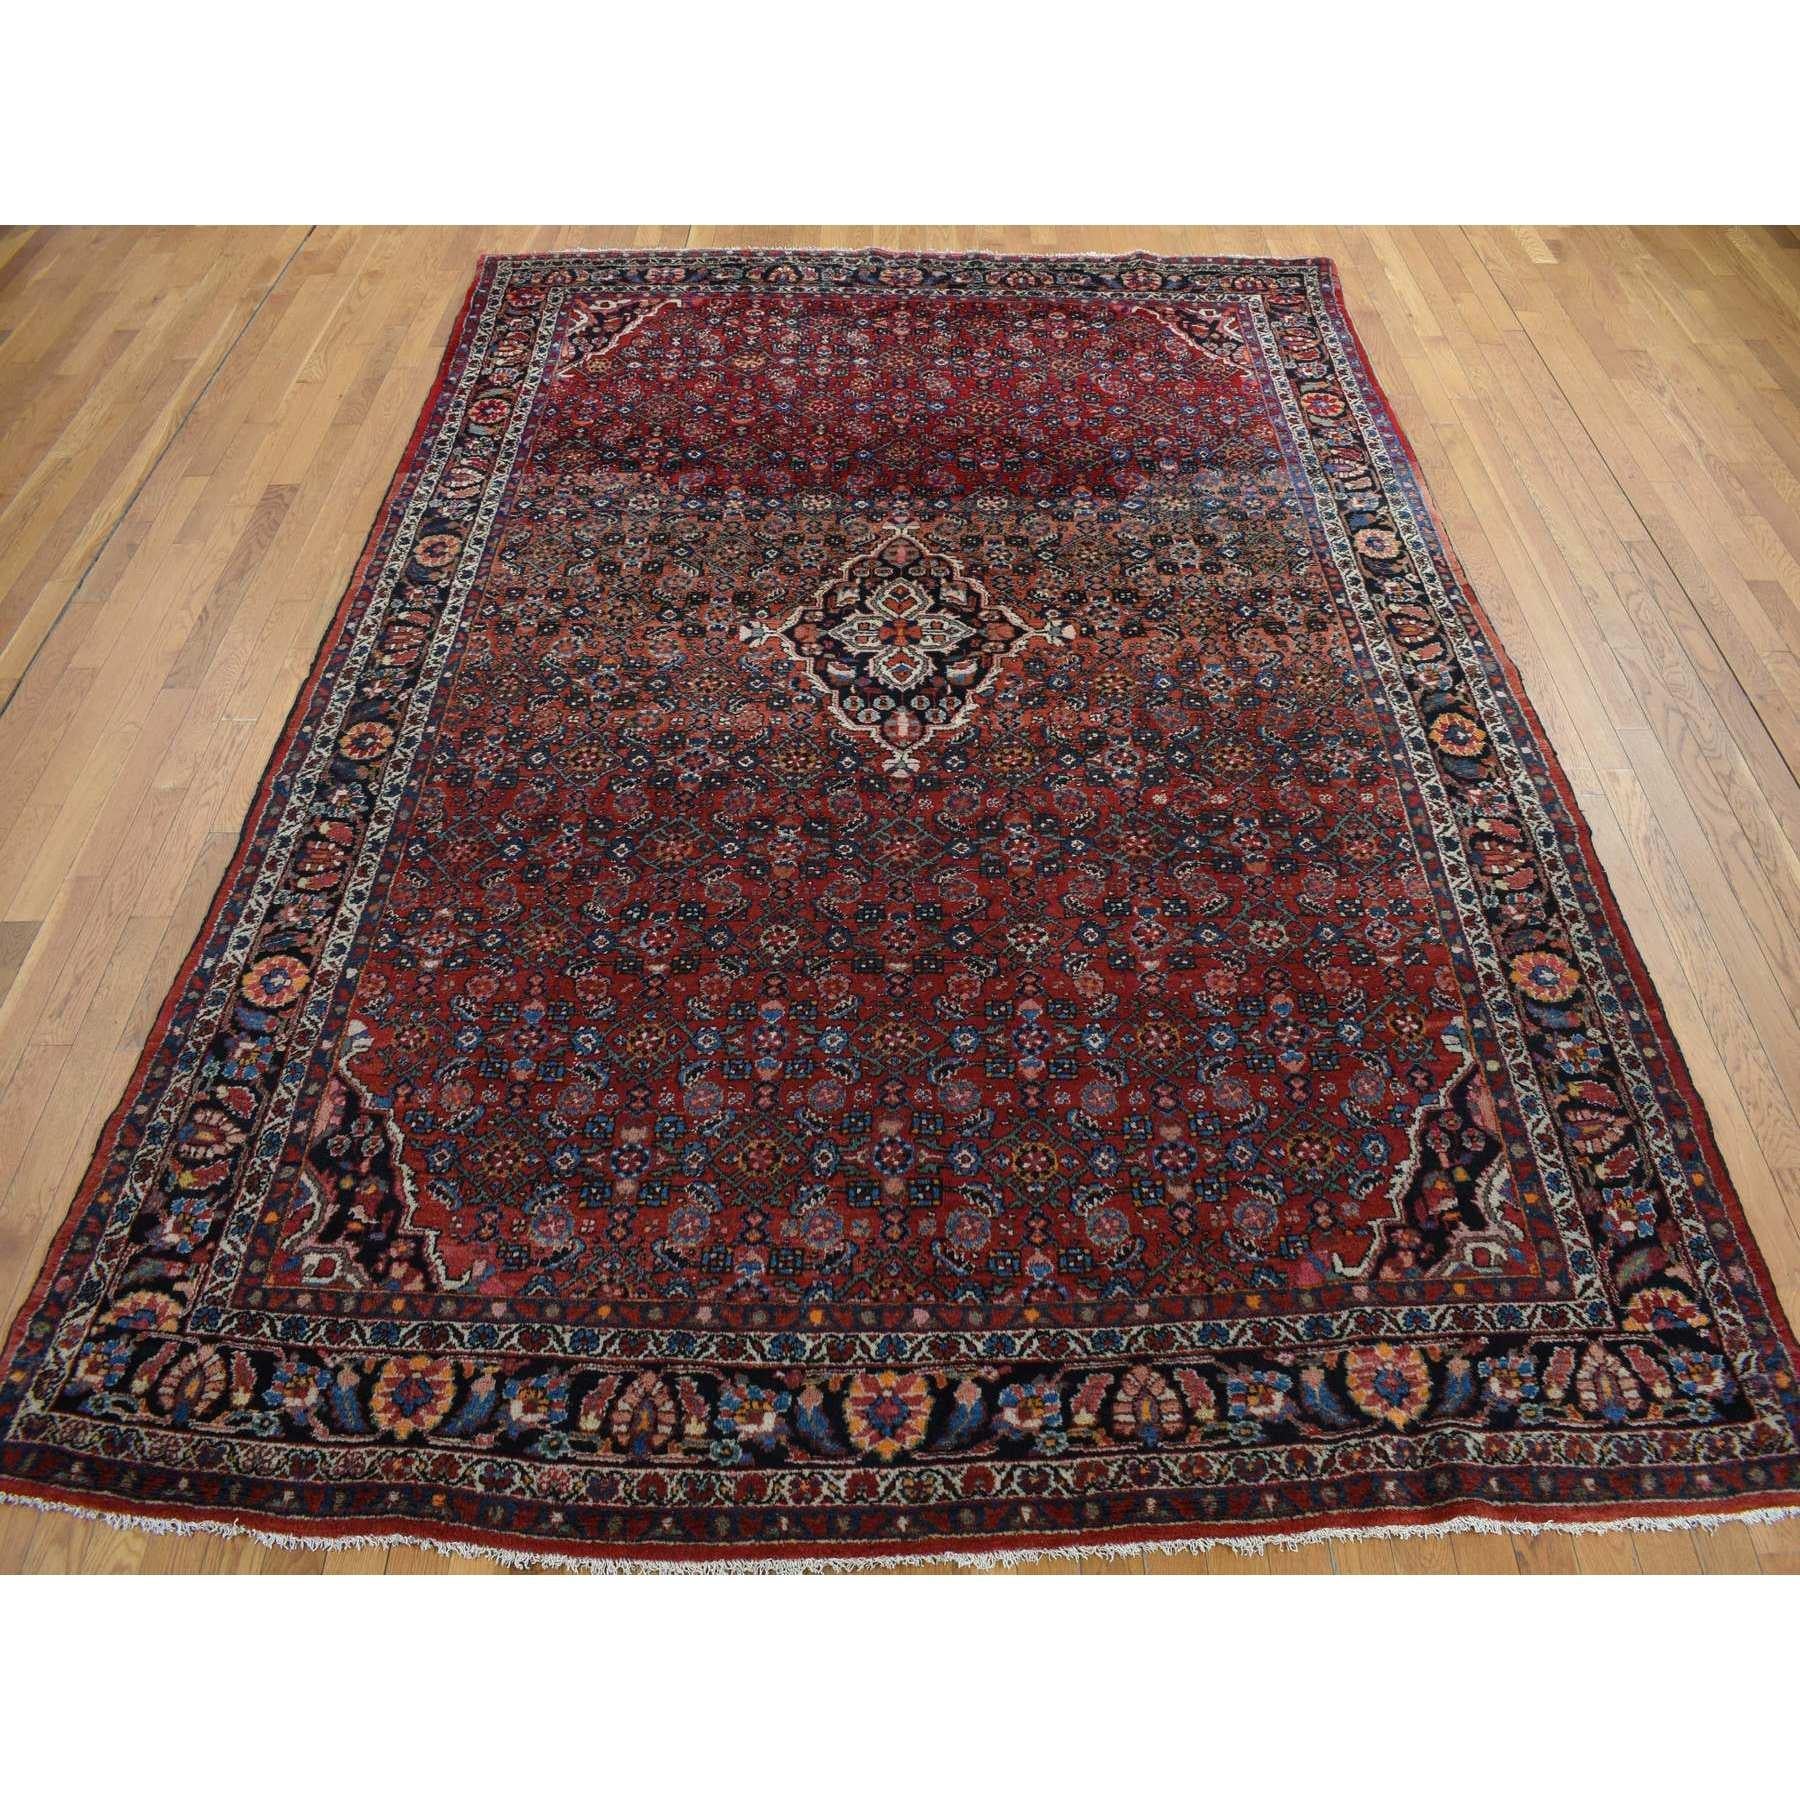 Medieval Pompeian Red Hand Knotted Antique Persian Hamadan Soft Wool Clean Rug 8'5